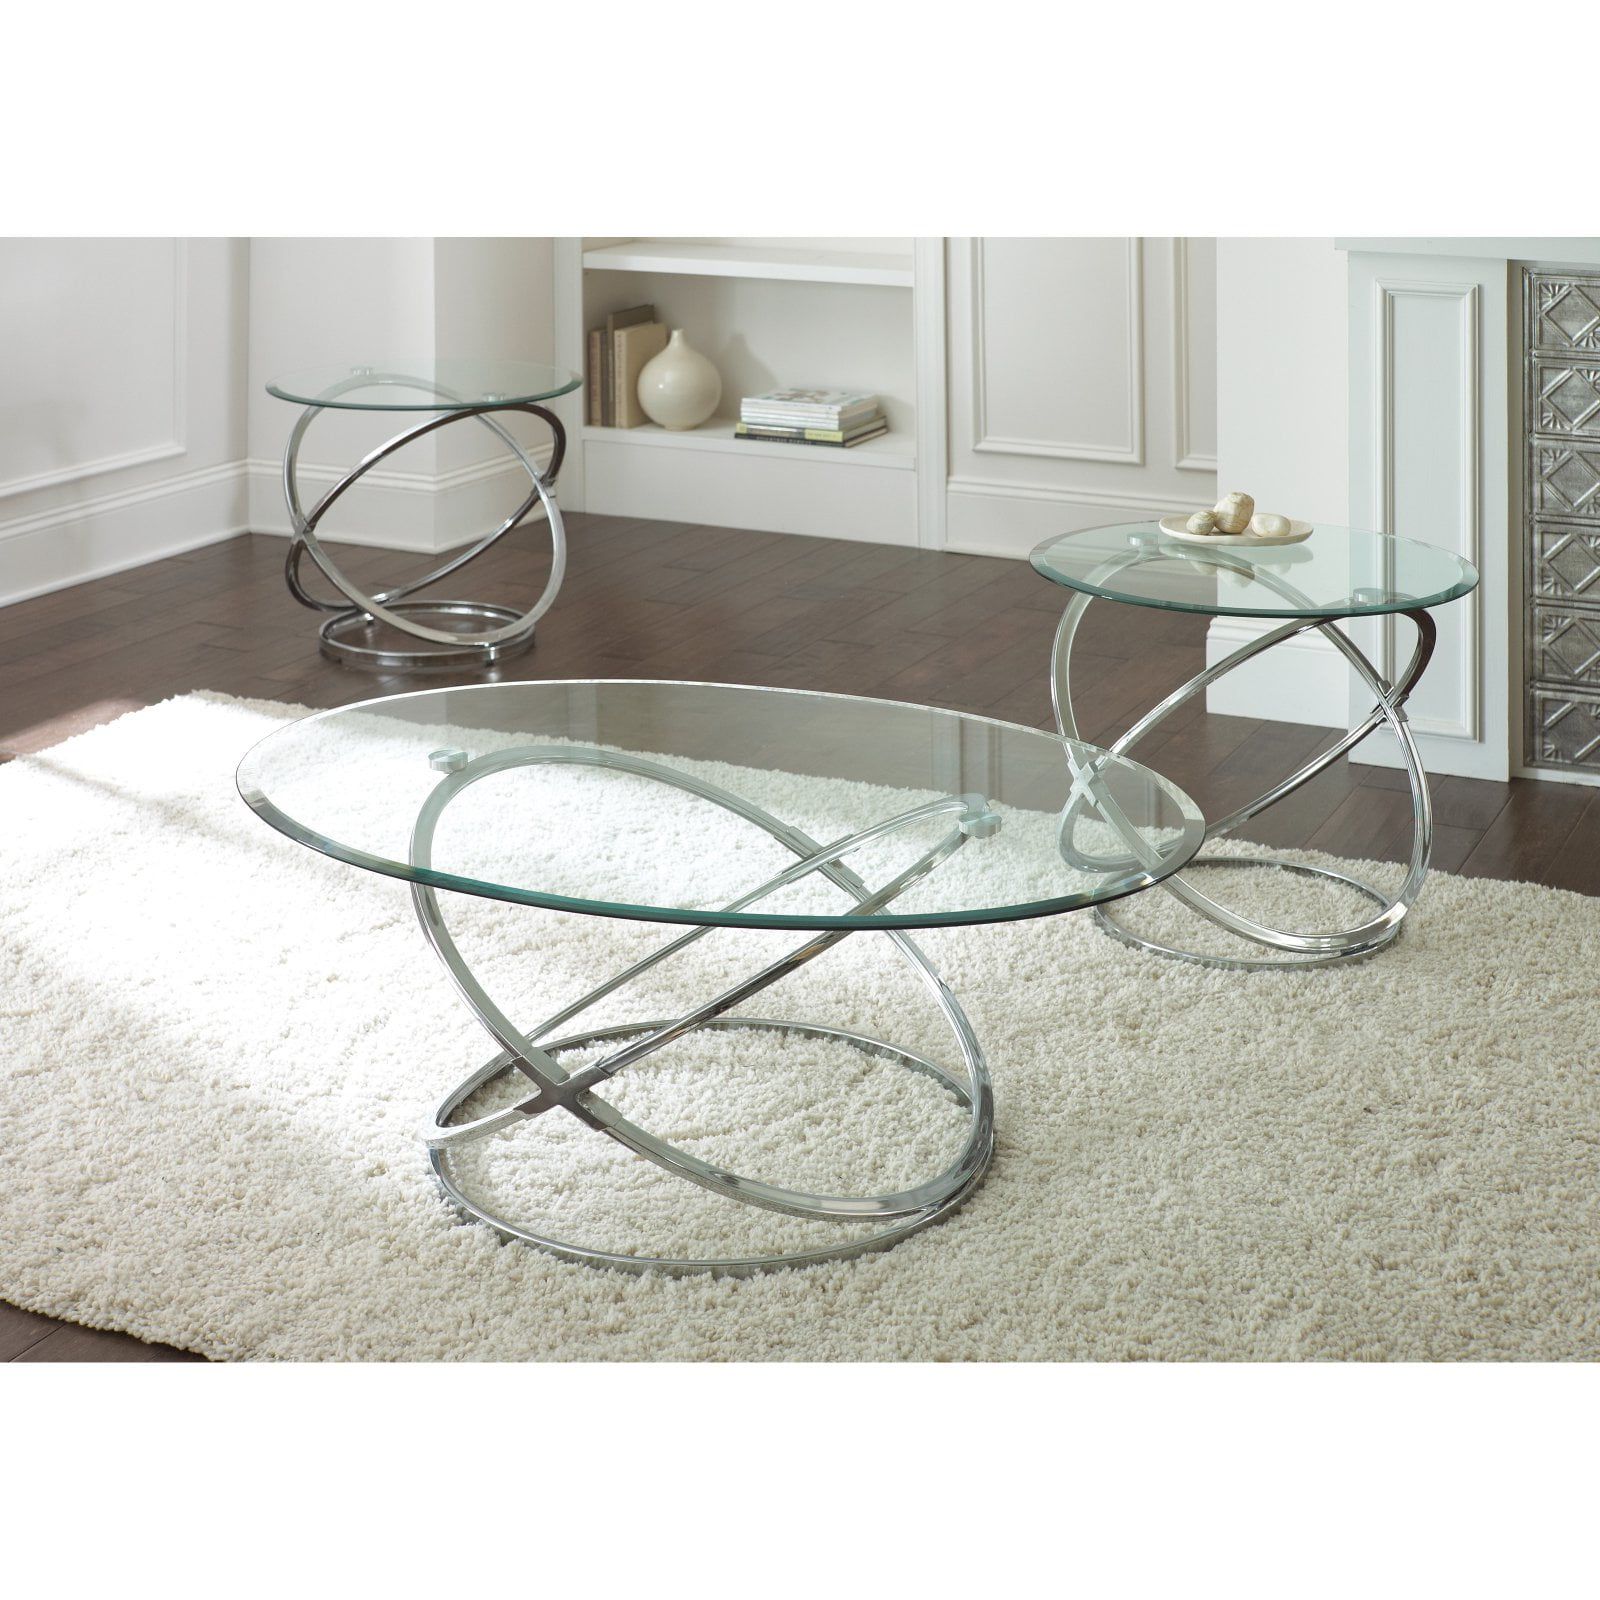 Favorite Oval Glass Coffee Tables Regarding Steve Silver Orion Oval Chrome And Glass Coffee Table Set – Walmart (View 14 of 15)